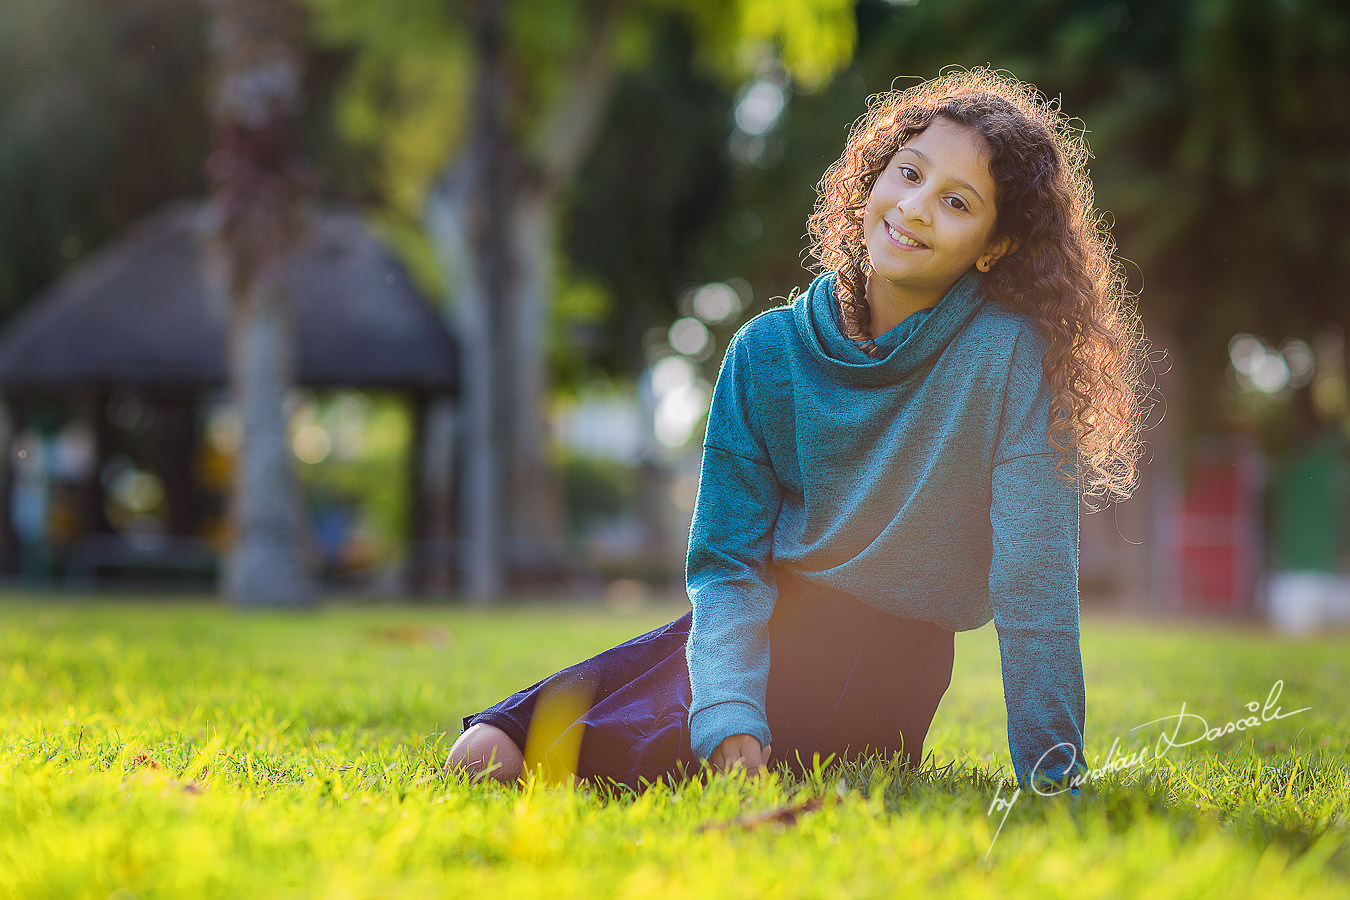 Beautiful young lady in the park, moments captured by Cristian Dascalu during a beautiful Limassol family photography photo session.